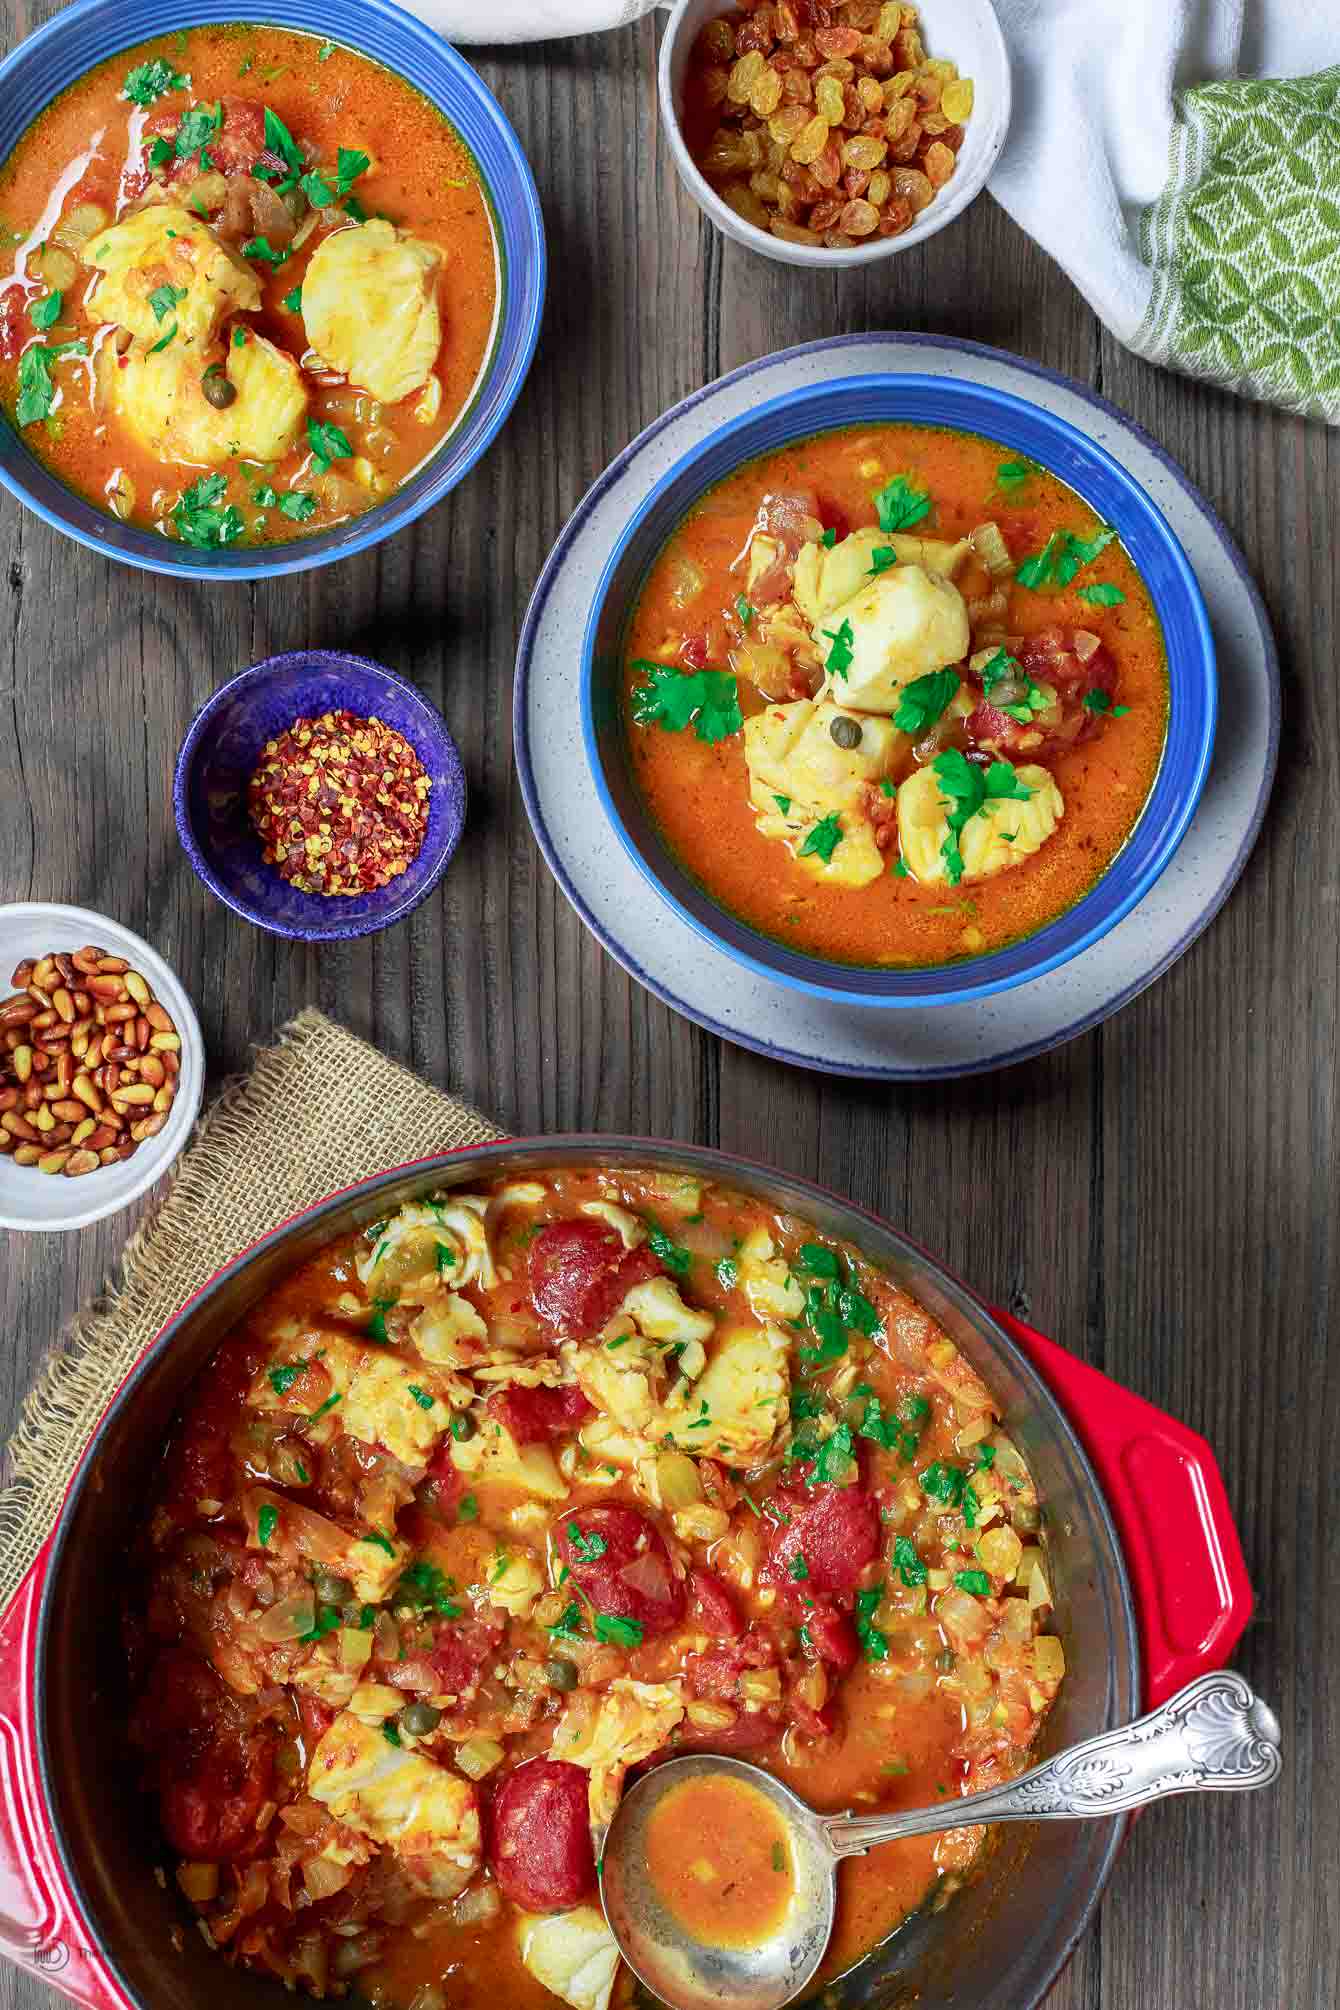 Fish stew served in bowls with extra red pepper and raisins on side